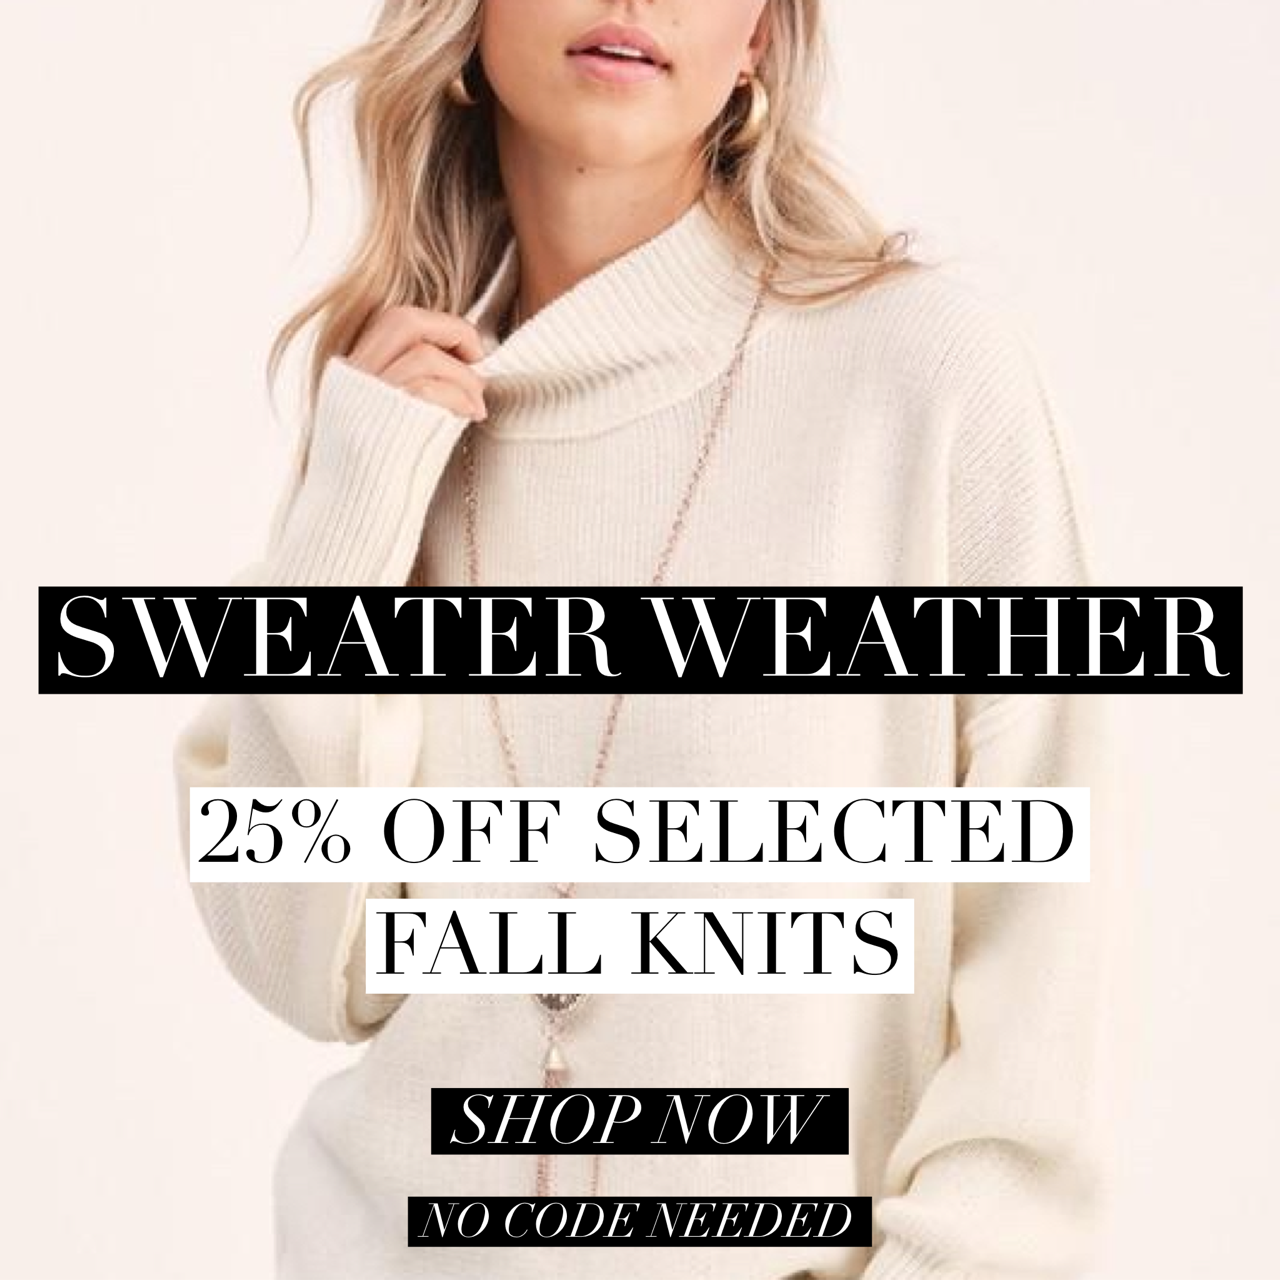 SWEATER WEATHER IS COMING!  SHOP & SAVE NOW!